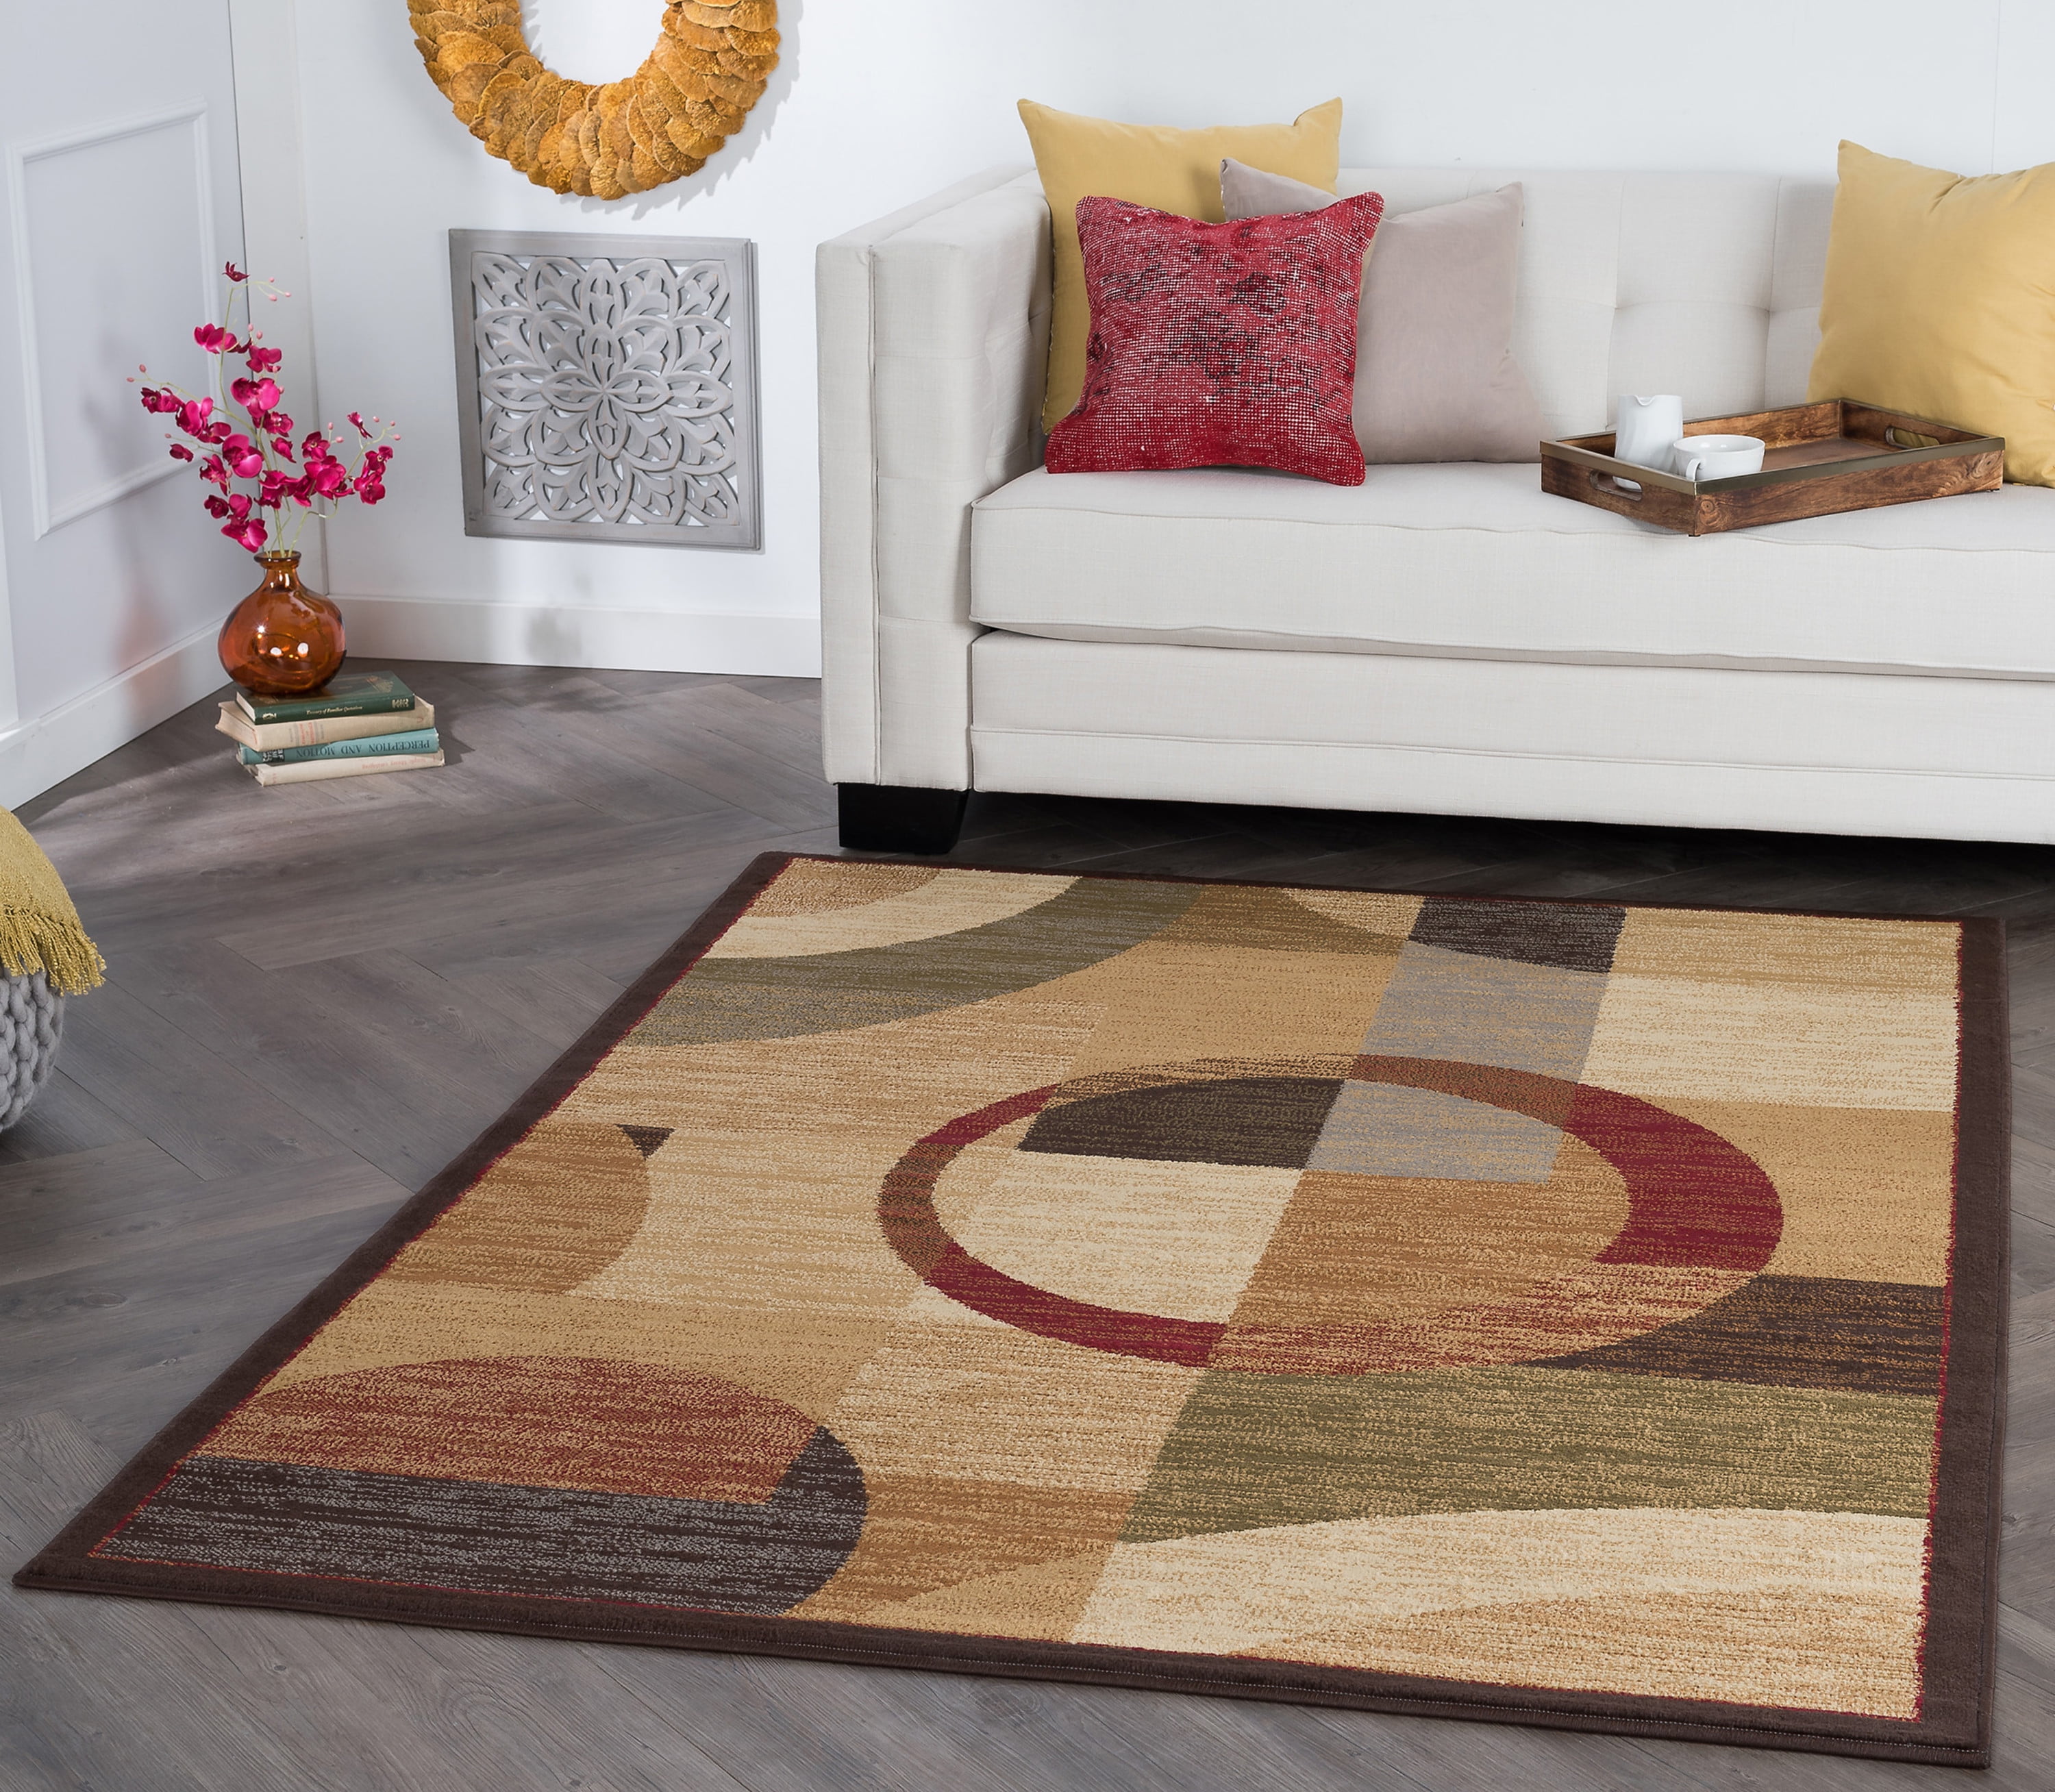 5x7 Modern Multi-Color Area Rugs for Living Room